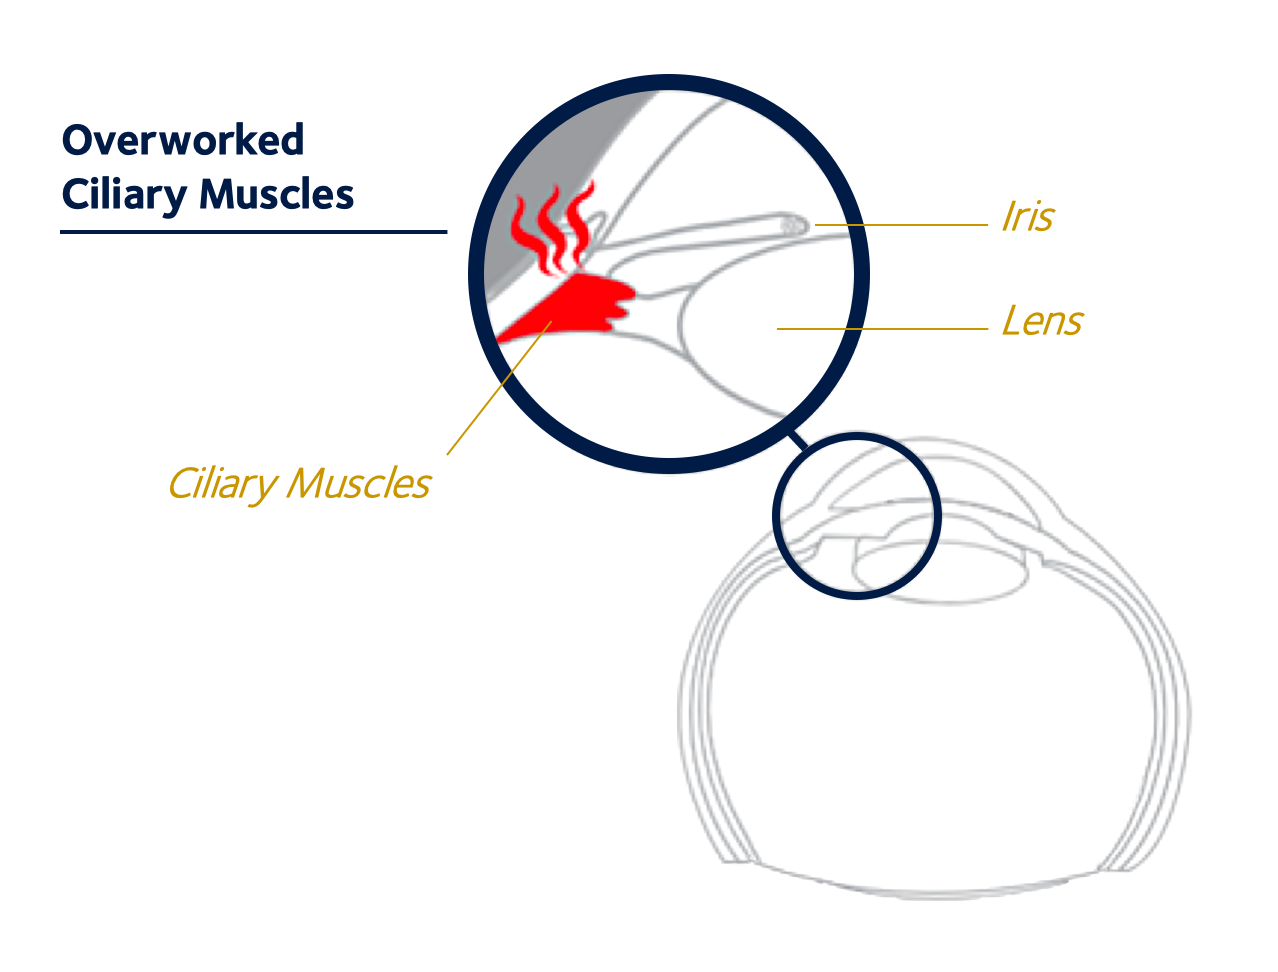 Overworked Ciliary Muscles illustration